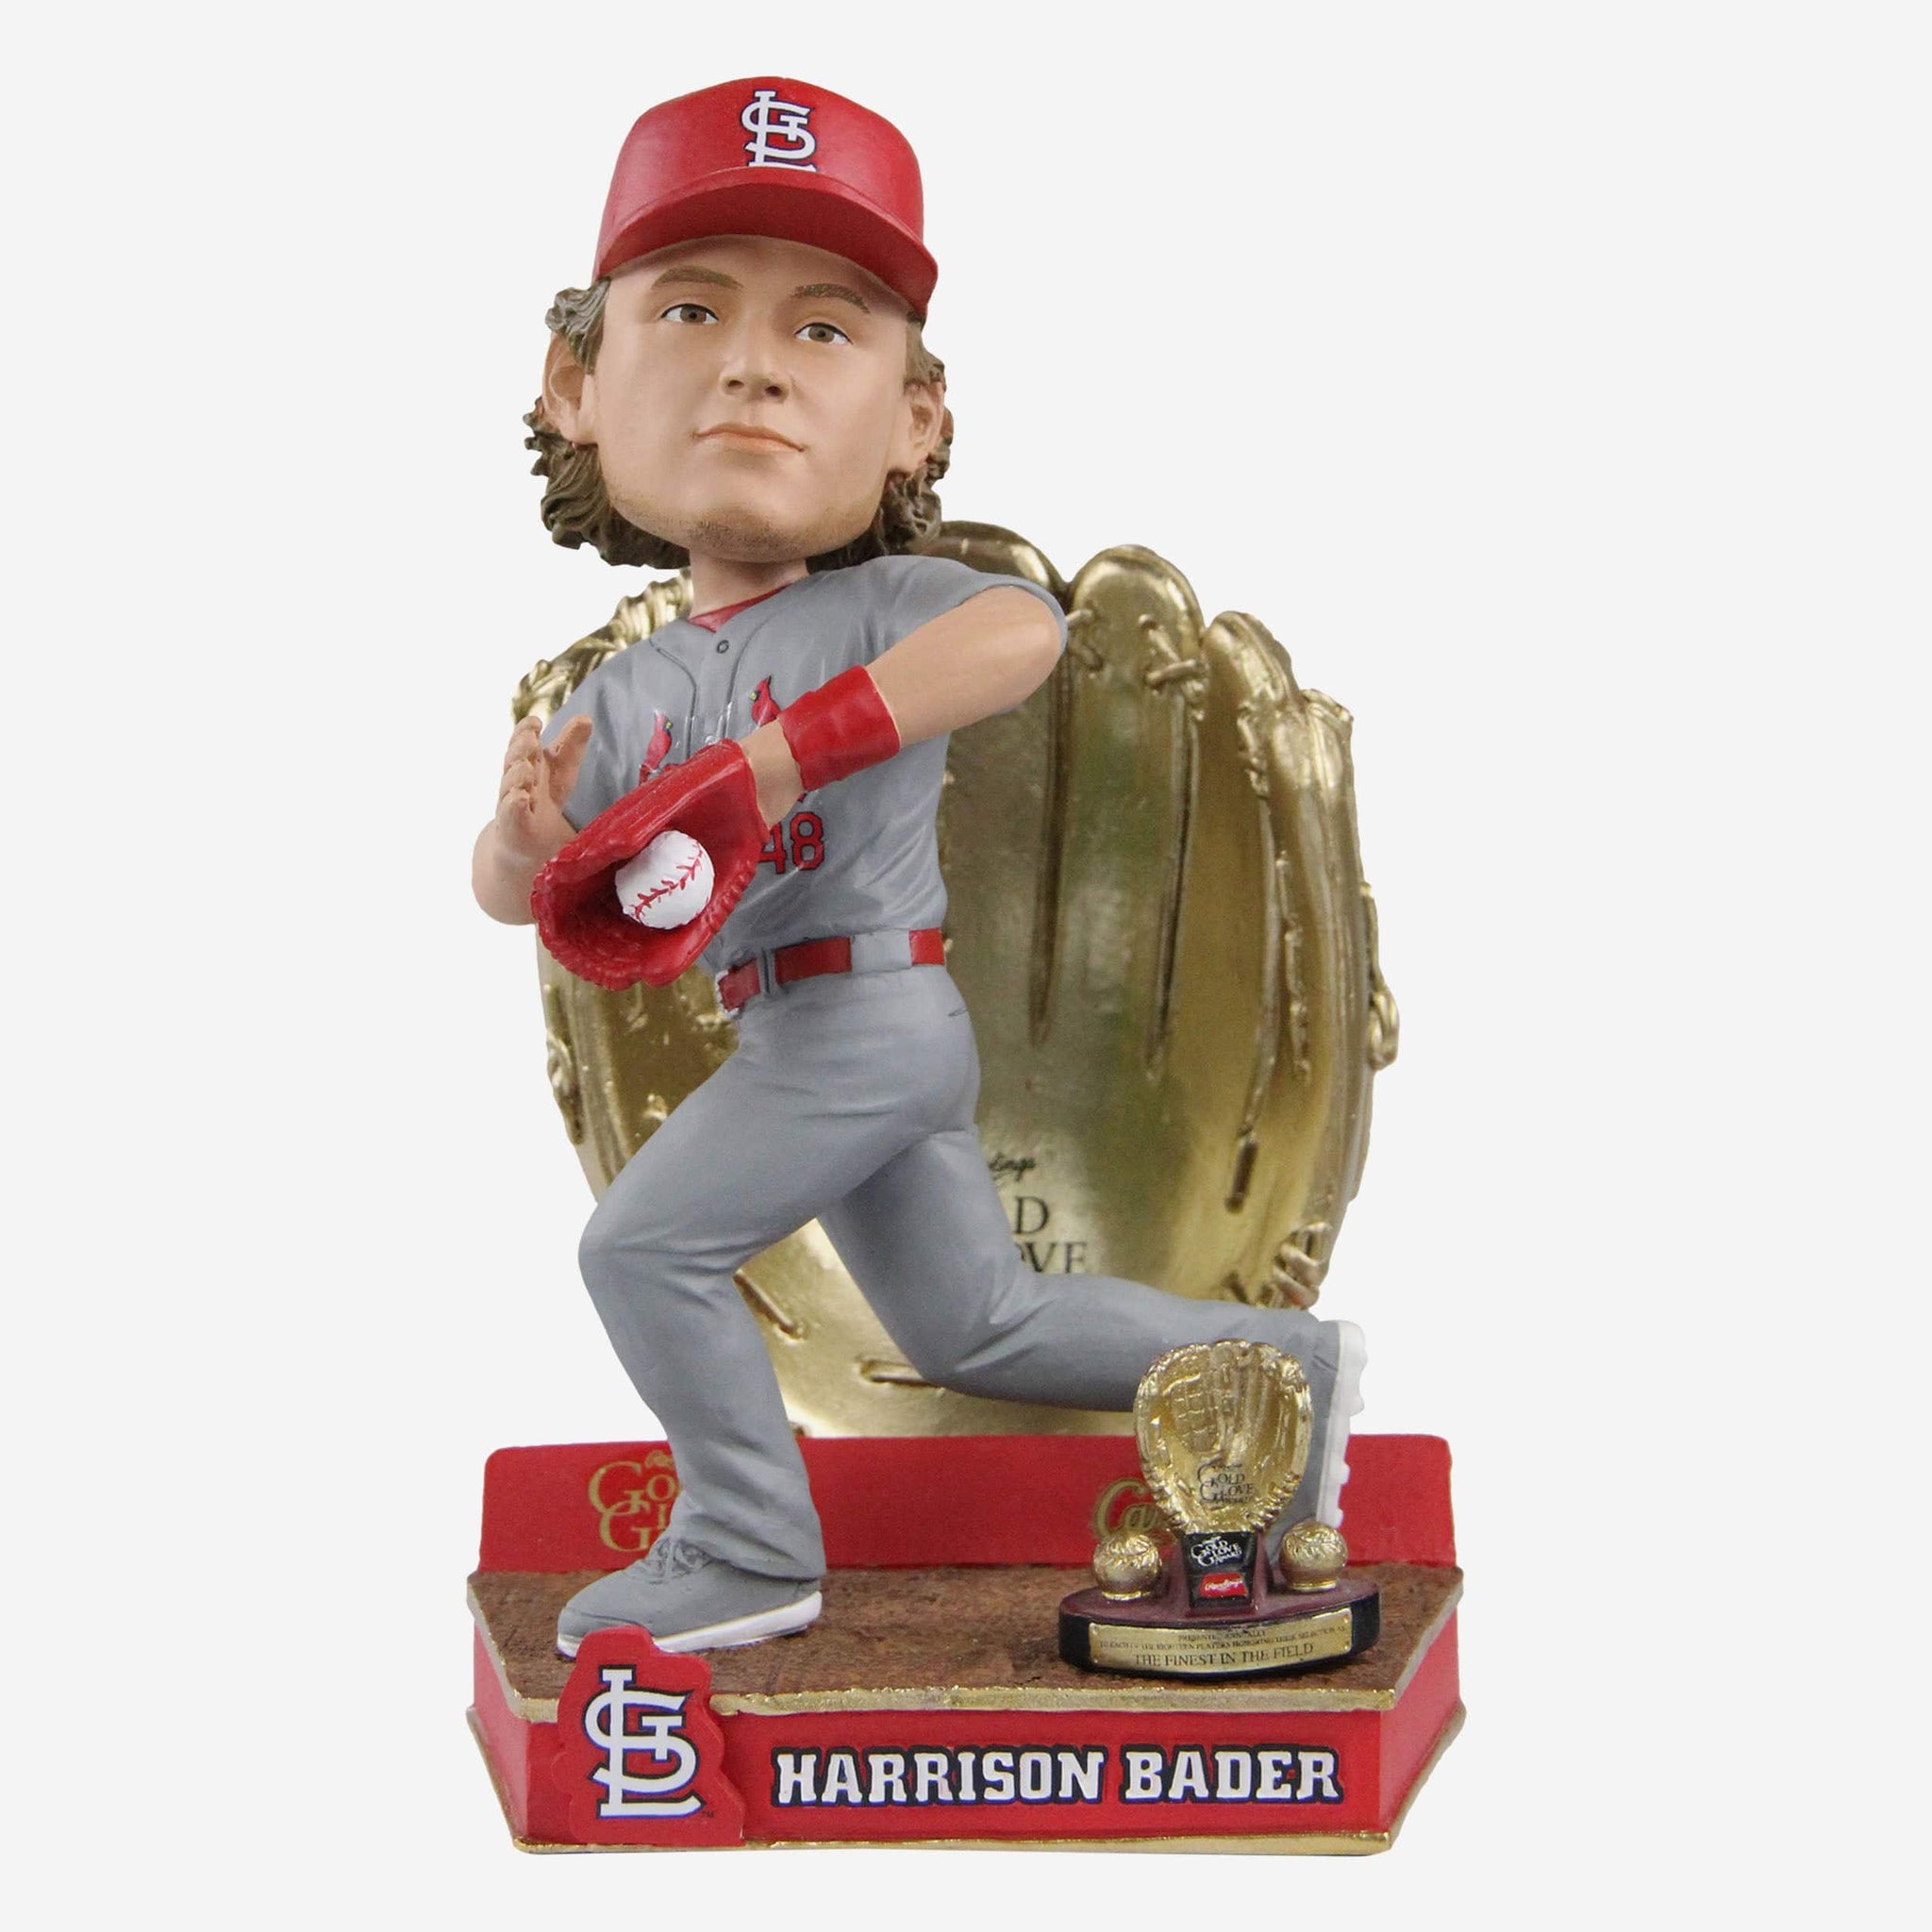 St. Louis Cardinals - How'd our first Harrison Bader bobblehead